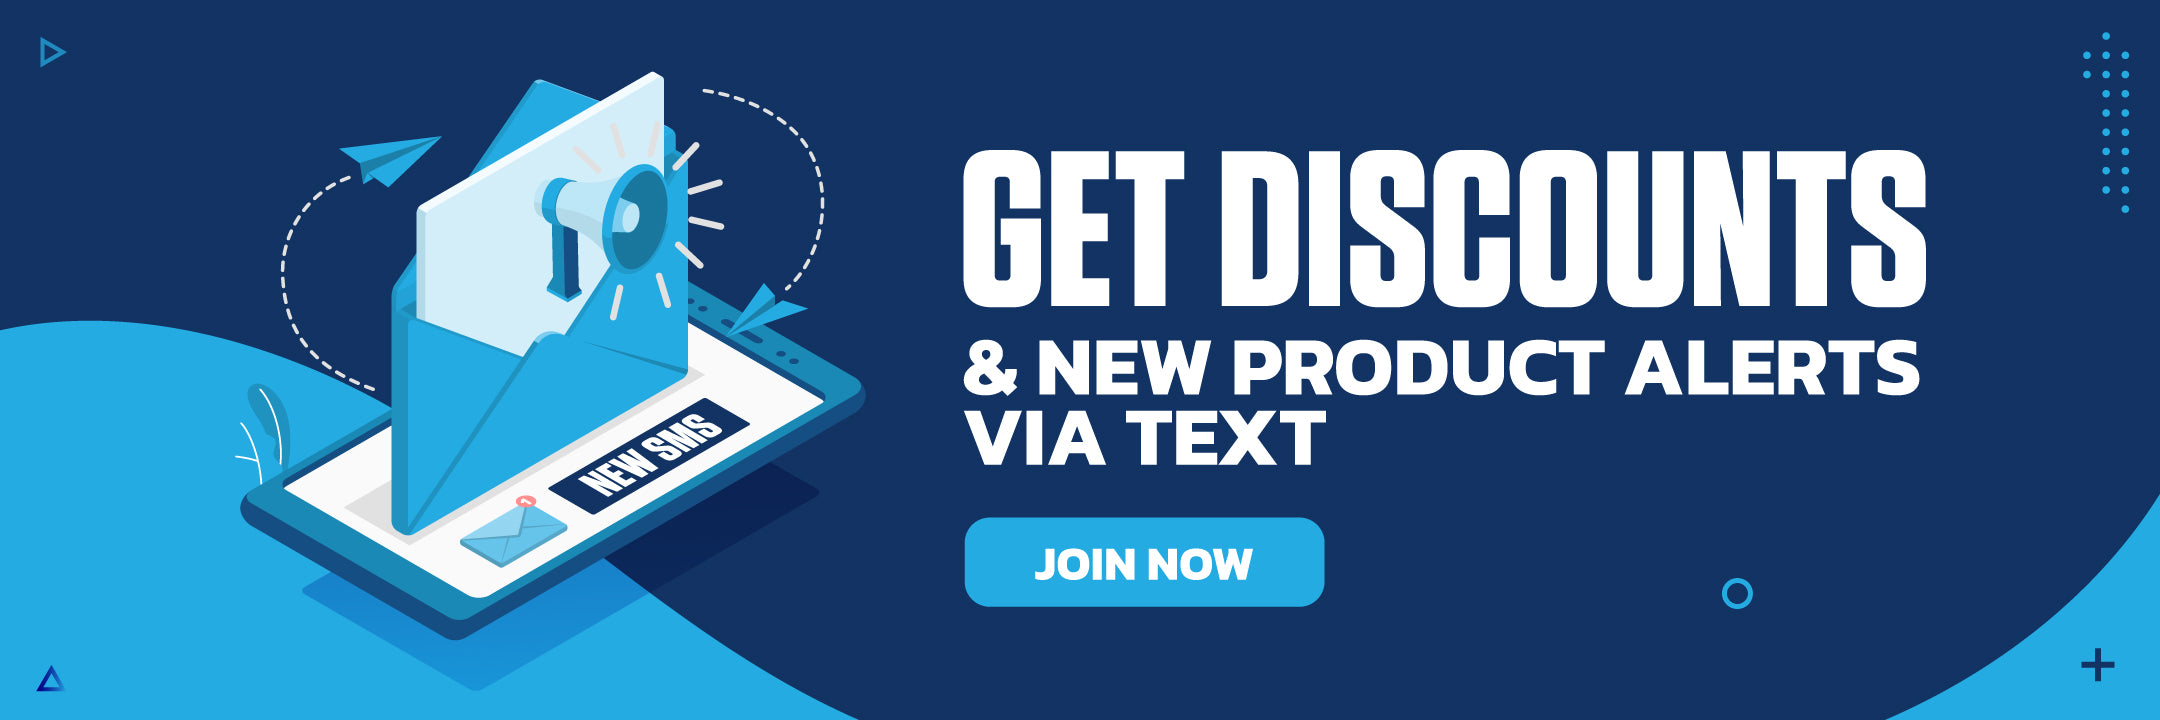 Sign up to receive text alerts from Satellite Radio Superstore